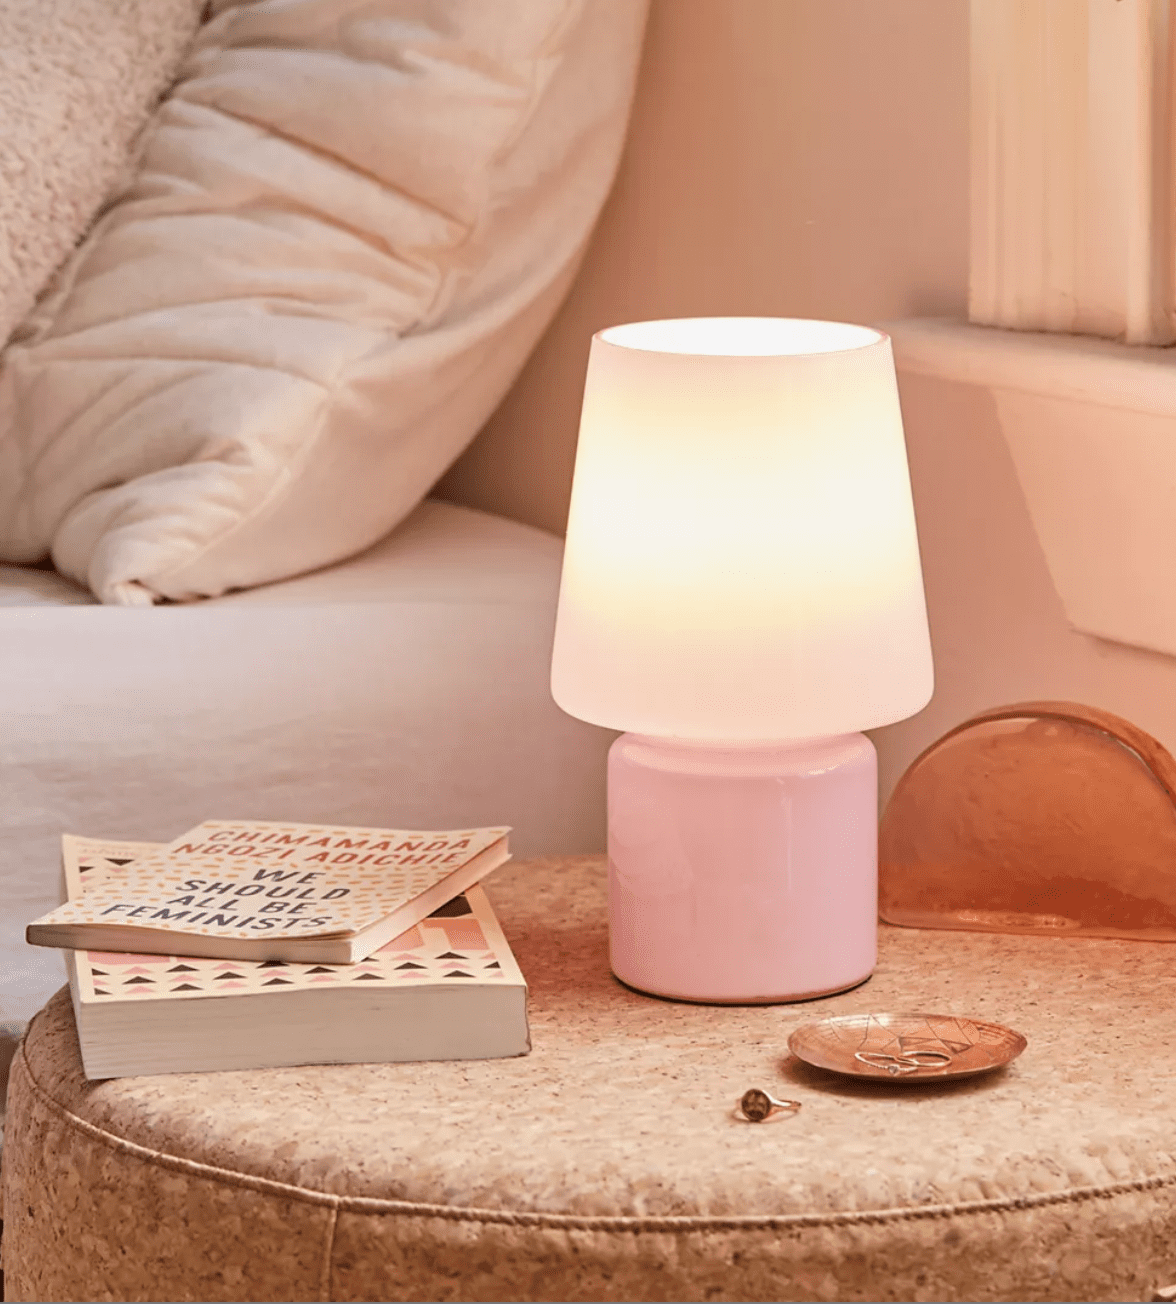 The Best Lamps For Dark Rooms in 2023